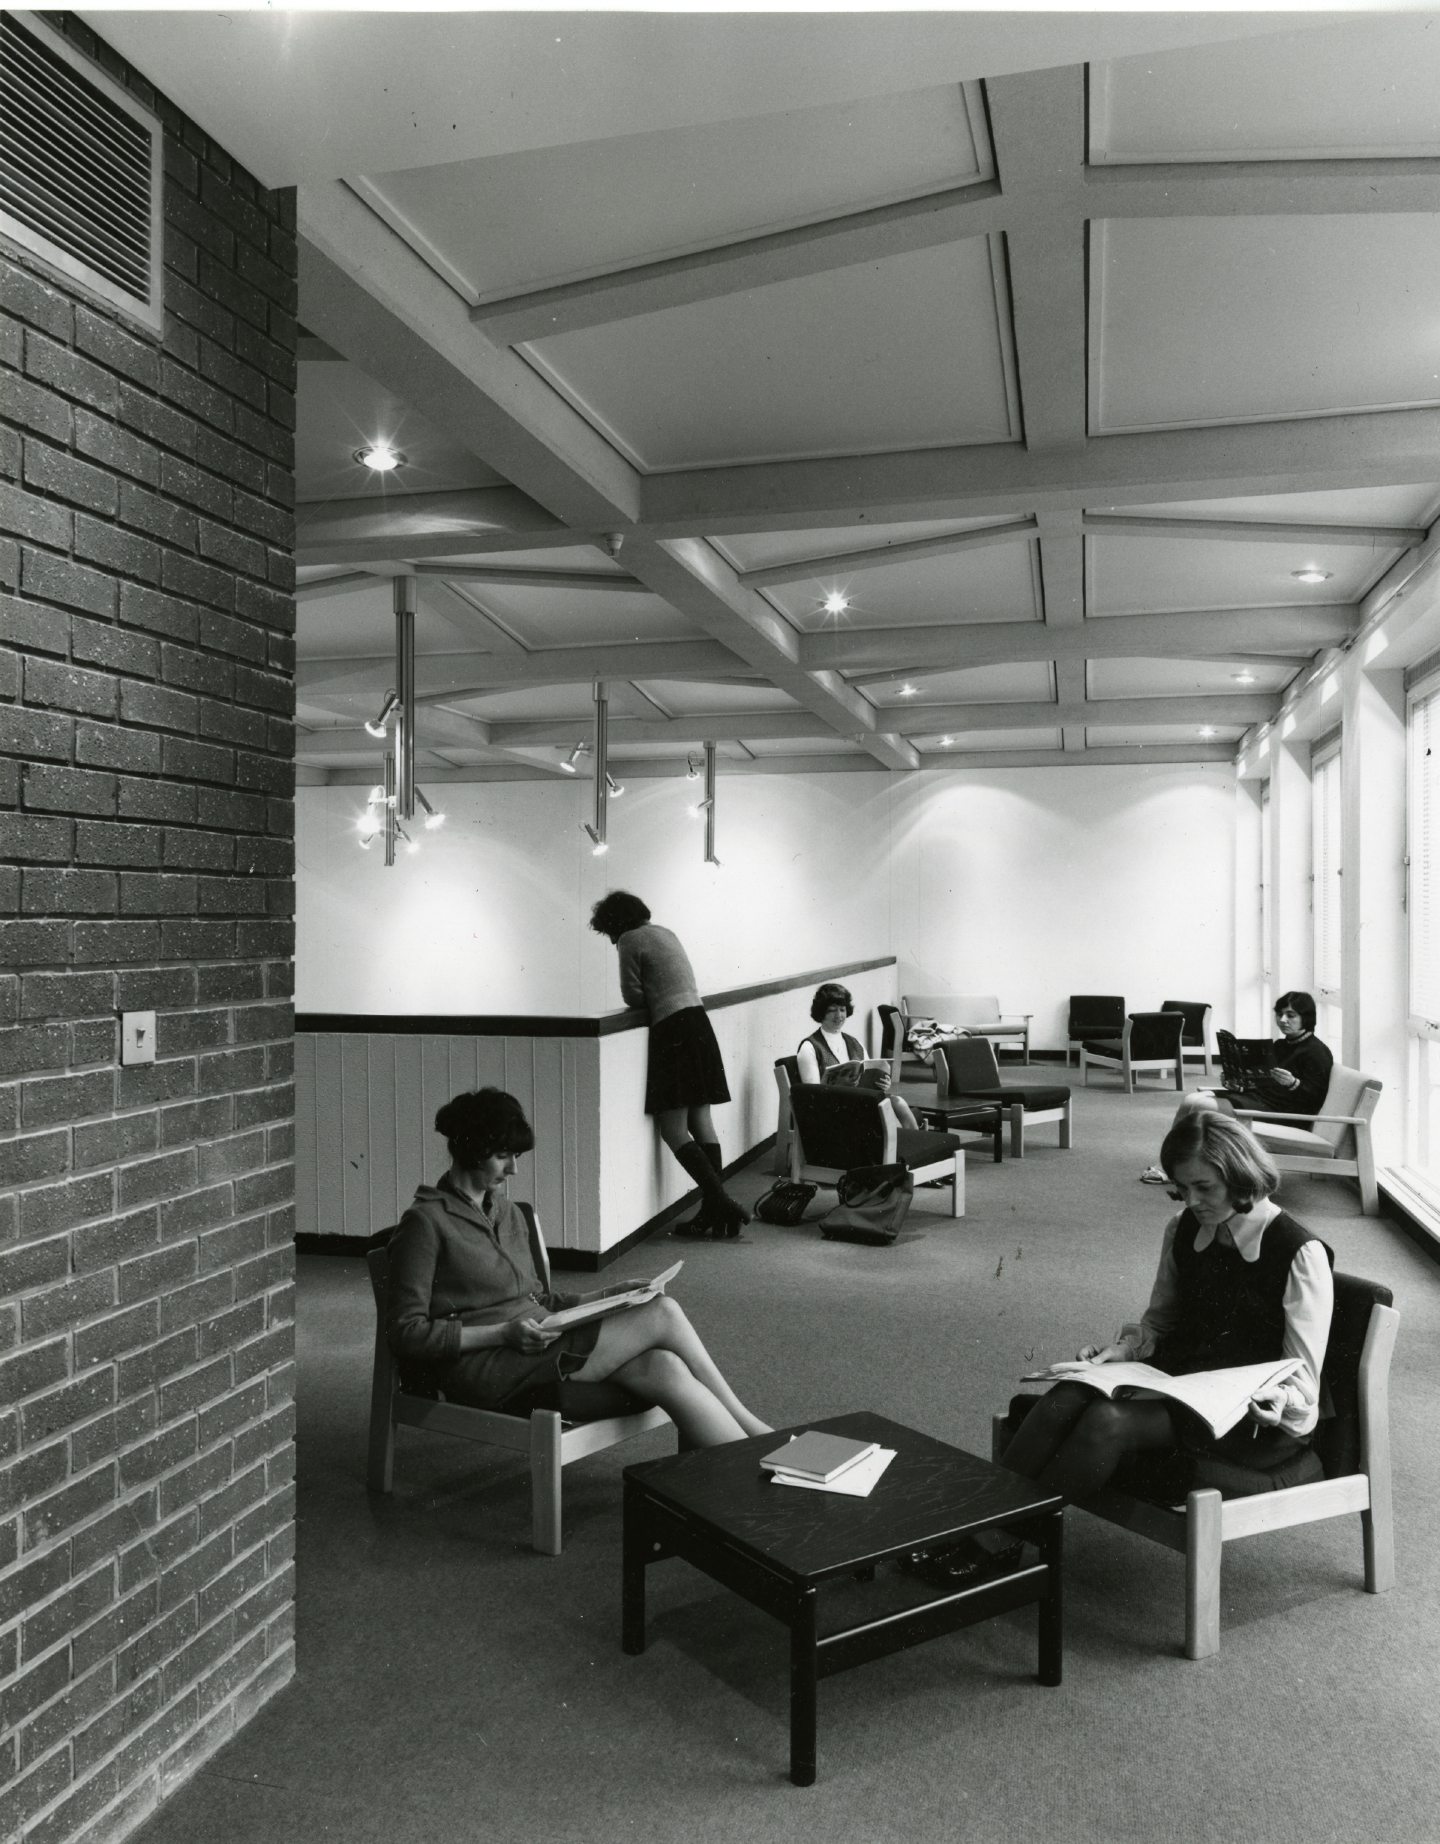 Female students can be seen seated reading textbooks in the common room gallery area.